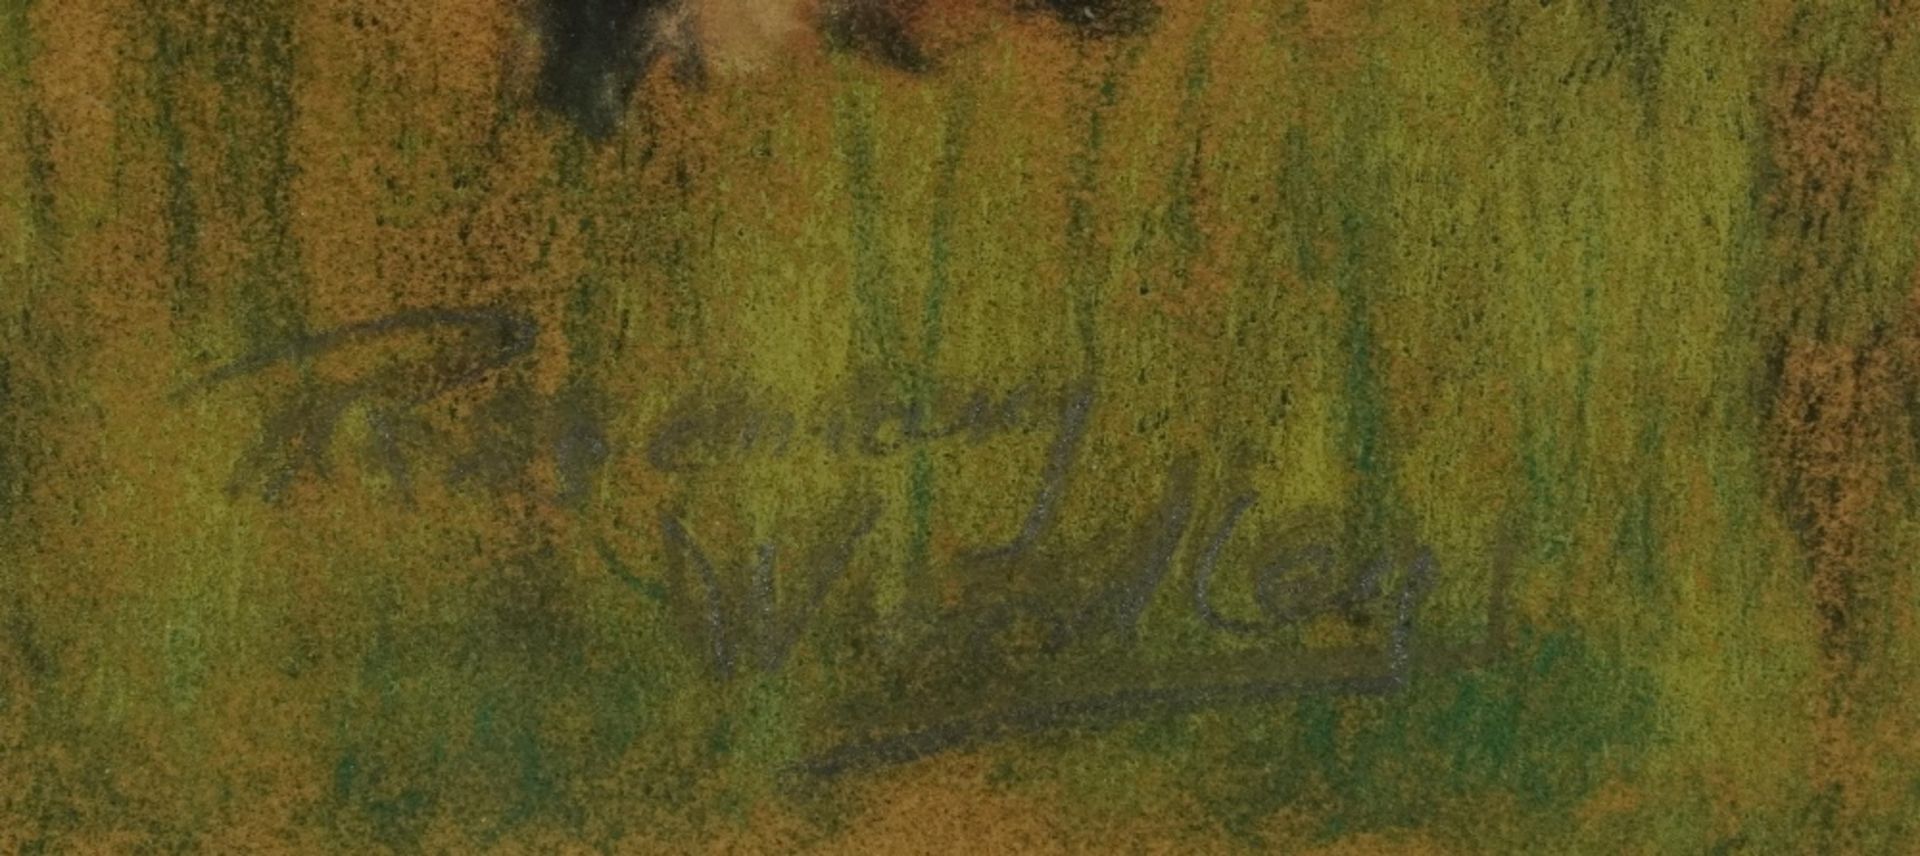 Study of two seated dogs, pastel, indistinctly signed, possibly Rosemary Woodley, mounted, framed - Image 3 of 4